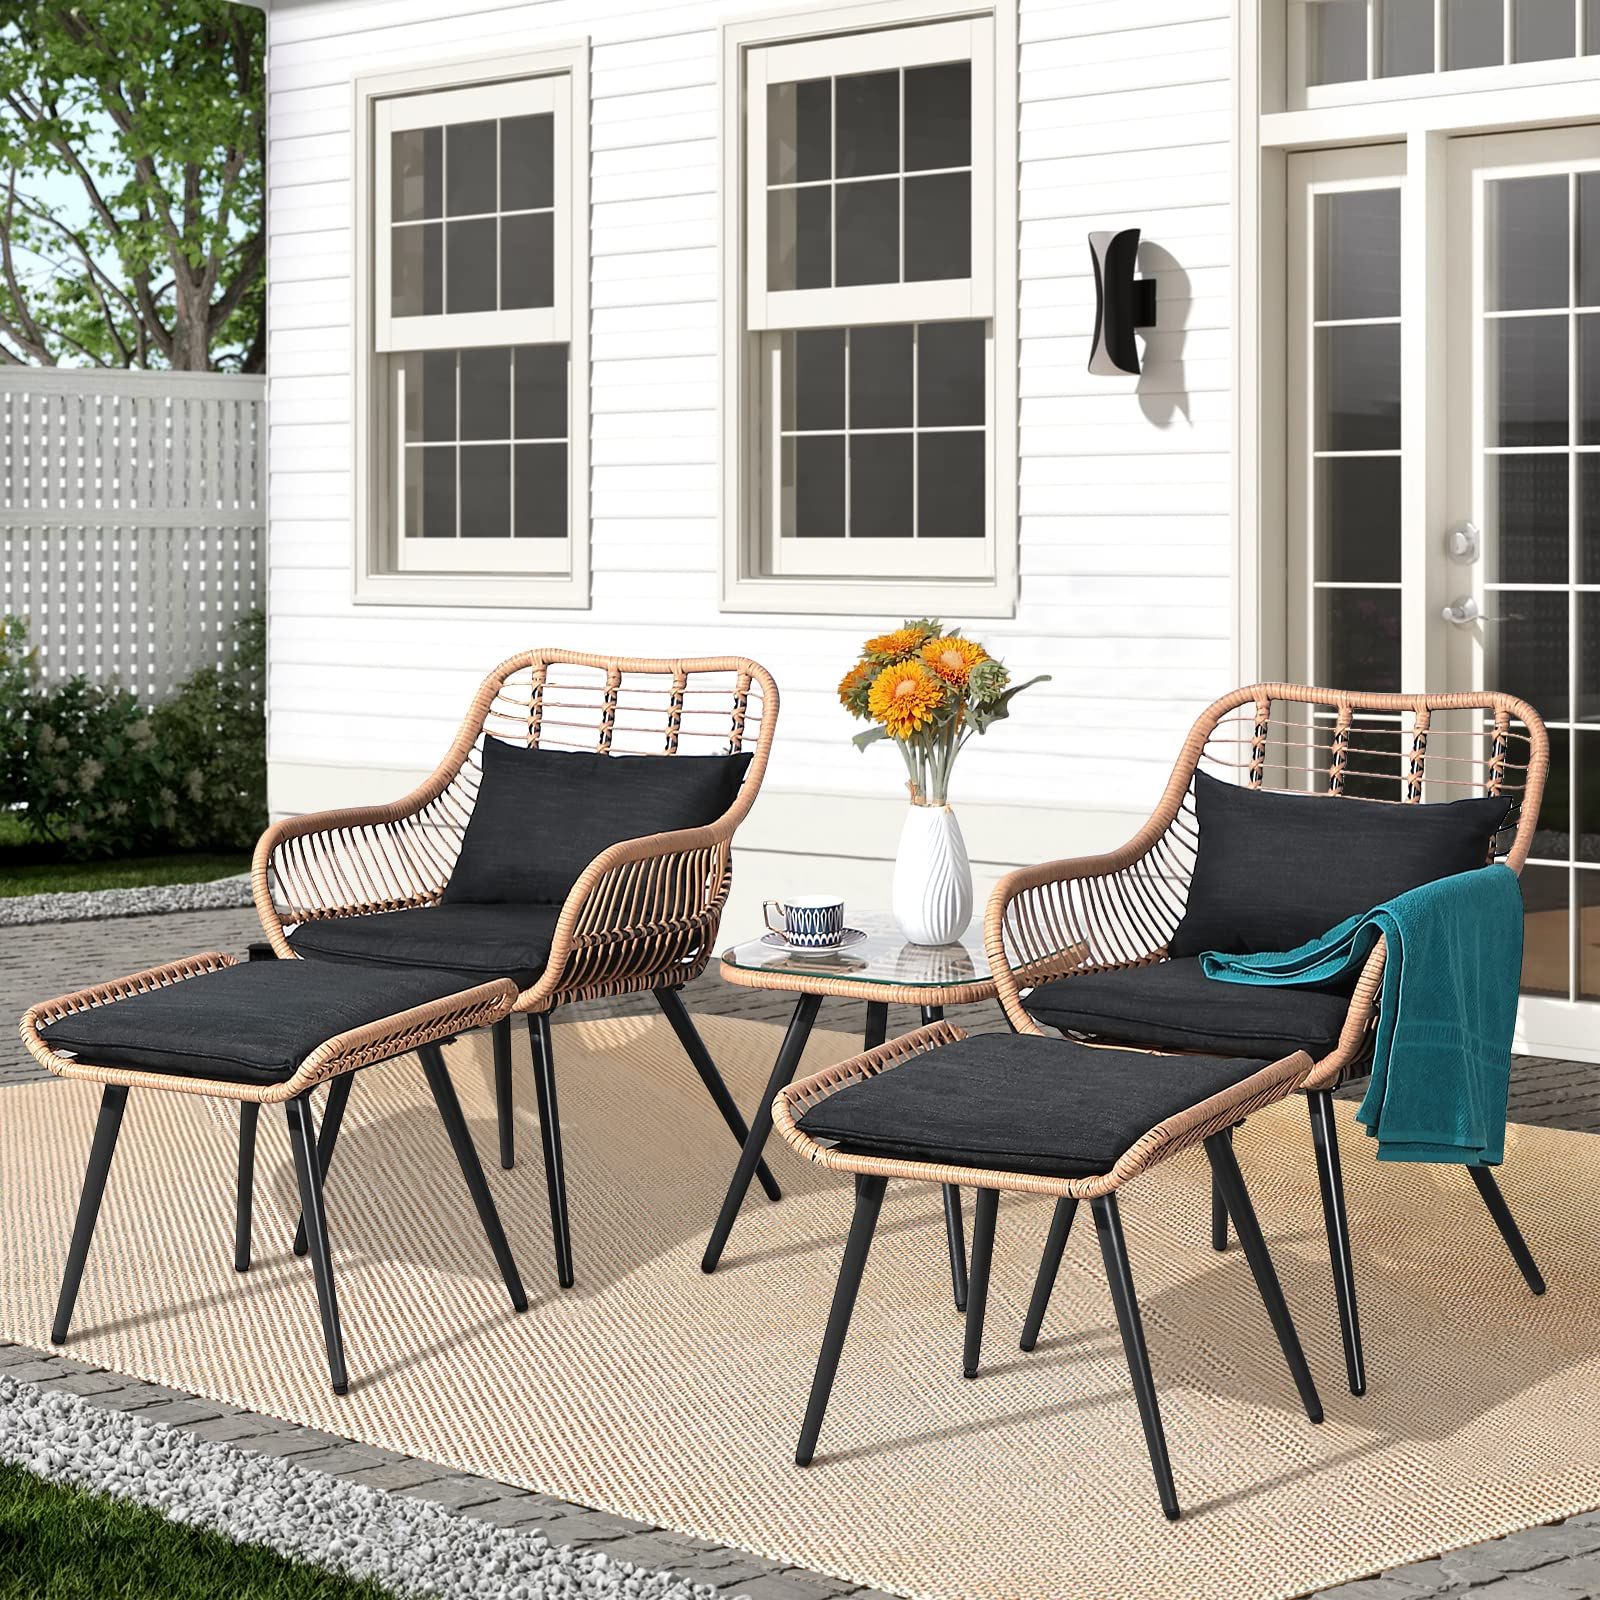 Famous 5 Piece Outdoor Patio Furniture Set Within Amazon: Joivi 5 Piece Outdoor Patio Furniture Set, Pe Rattan Wicker  Small Patio Conversation Set Porch Furniture, Cushioned Patio Chairs With  Ottomans And Side Table : Patio, Lawn & Garden (Photo 5 of 15)